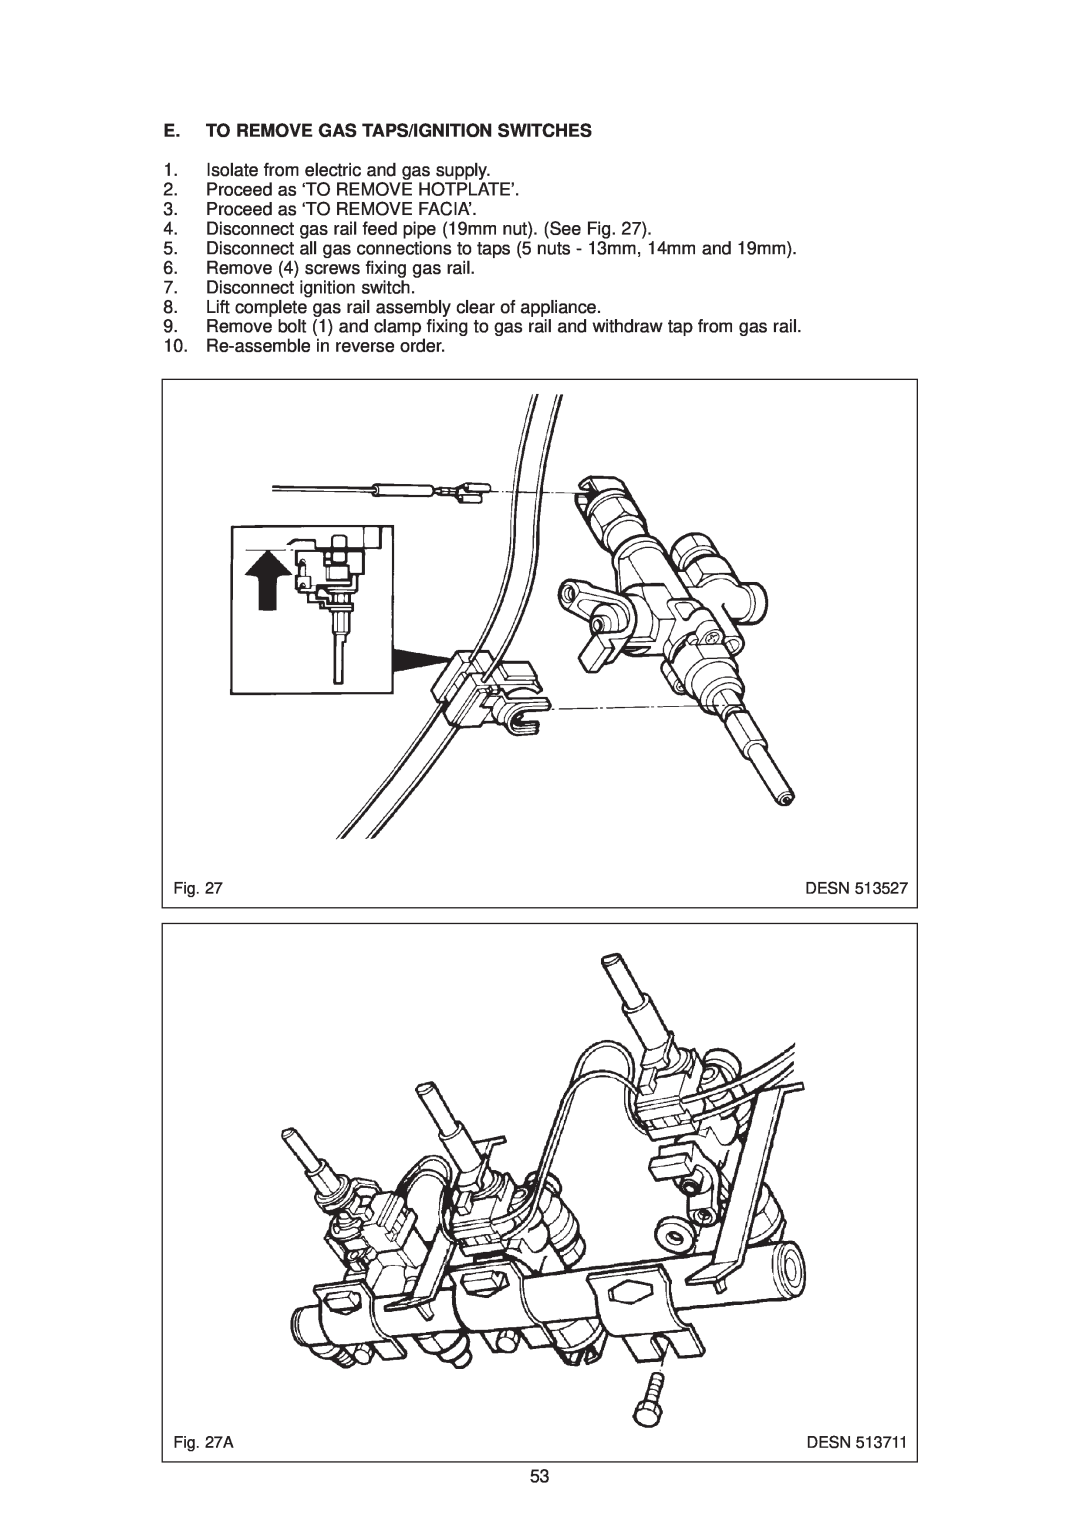 Aga Ranges DESN 512387 A owner manual E. To Remove Gas Taps/Ignition Switches 